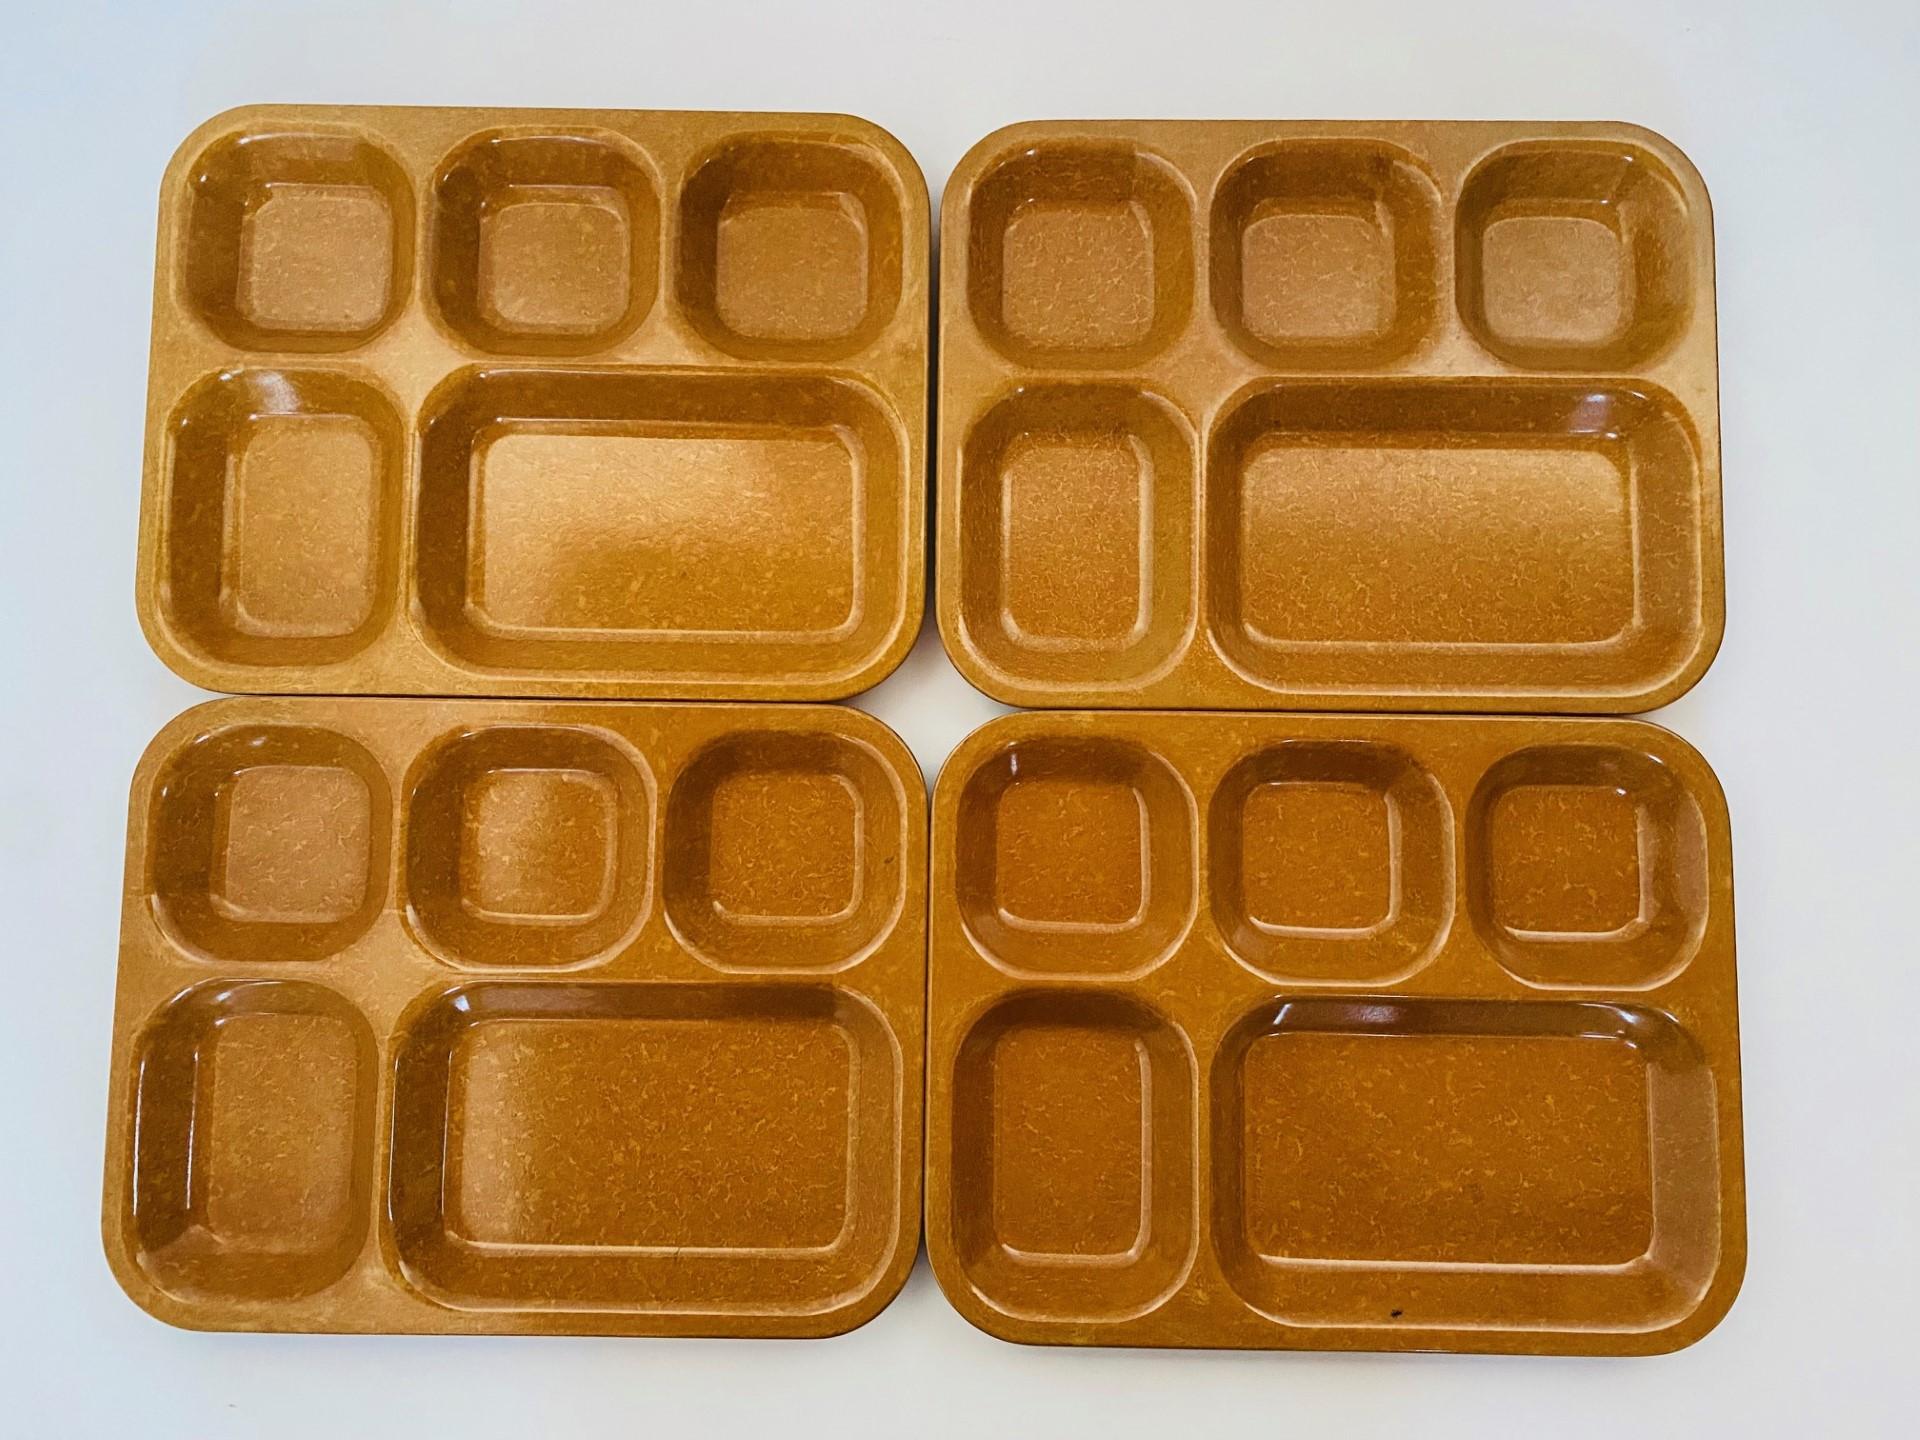 Vintage 4 Melamine USA Bolta- 1966 “Mess” “Cafeteria” Trays in Butterscotch/Caramel Speckled/Splatter Color.  This entertaining set of classically known “Mess” Trays are substantial in melamine.  Each features 5 different compartments with their